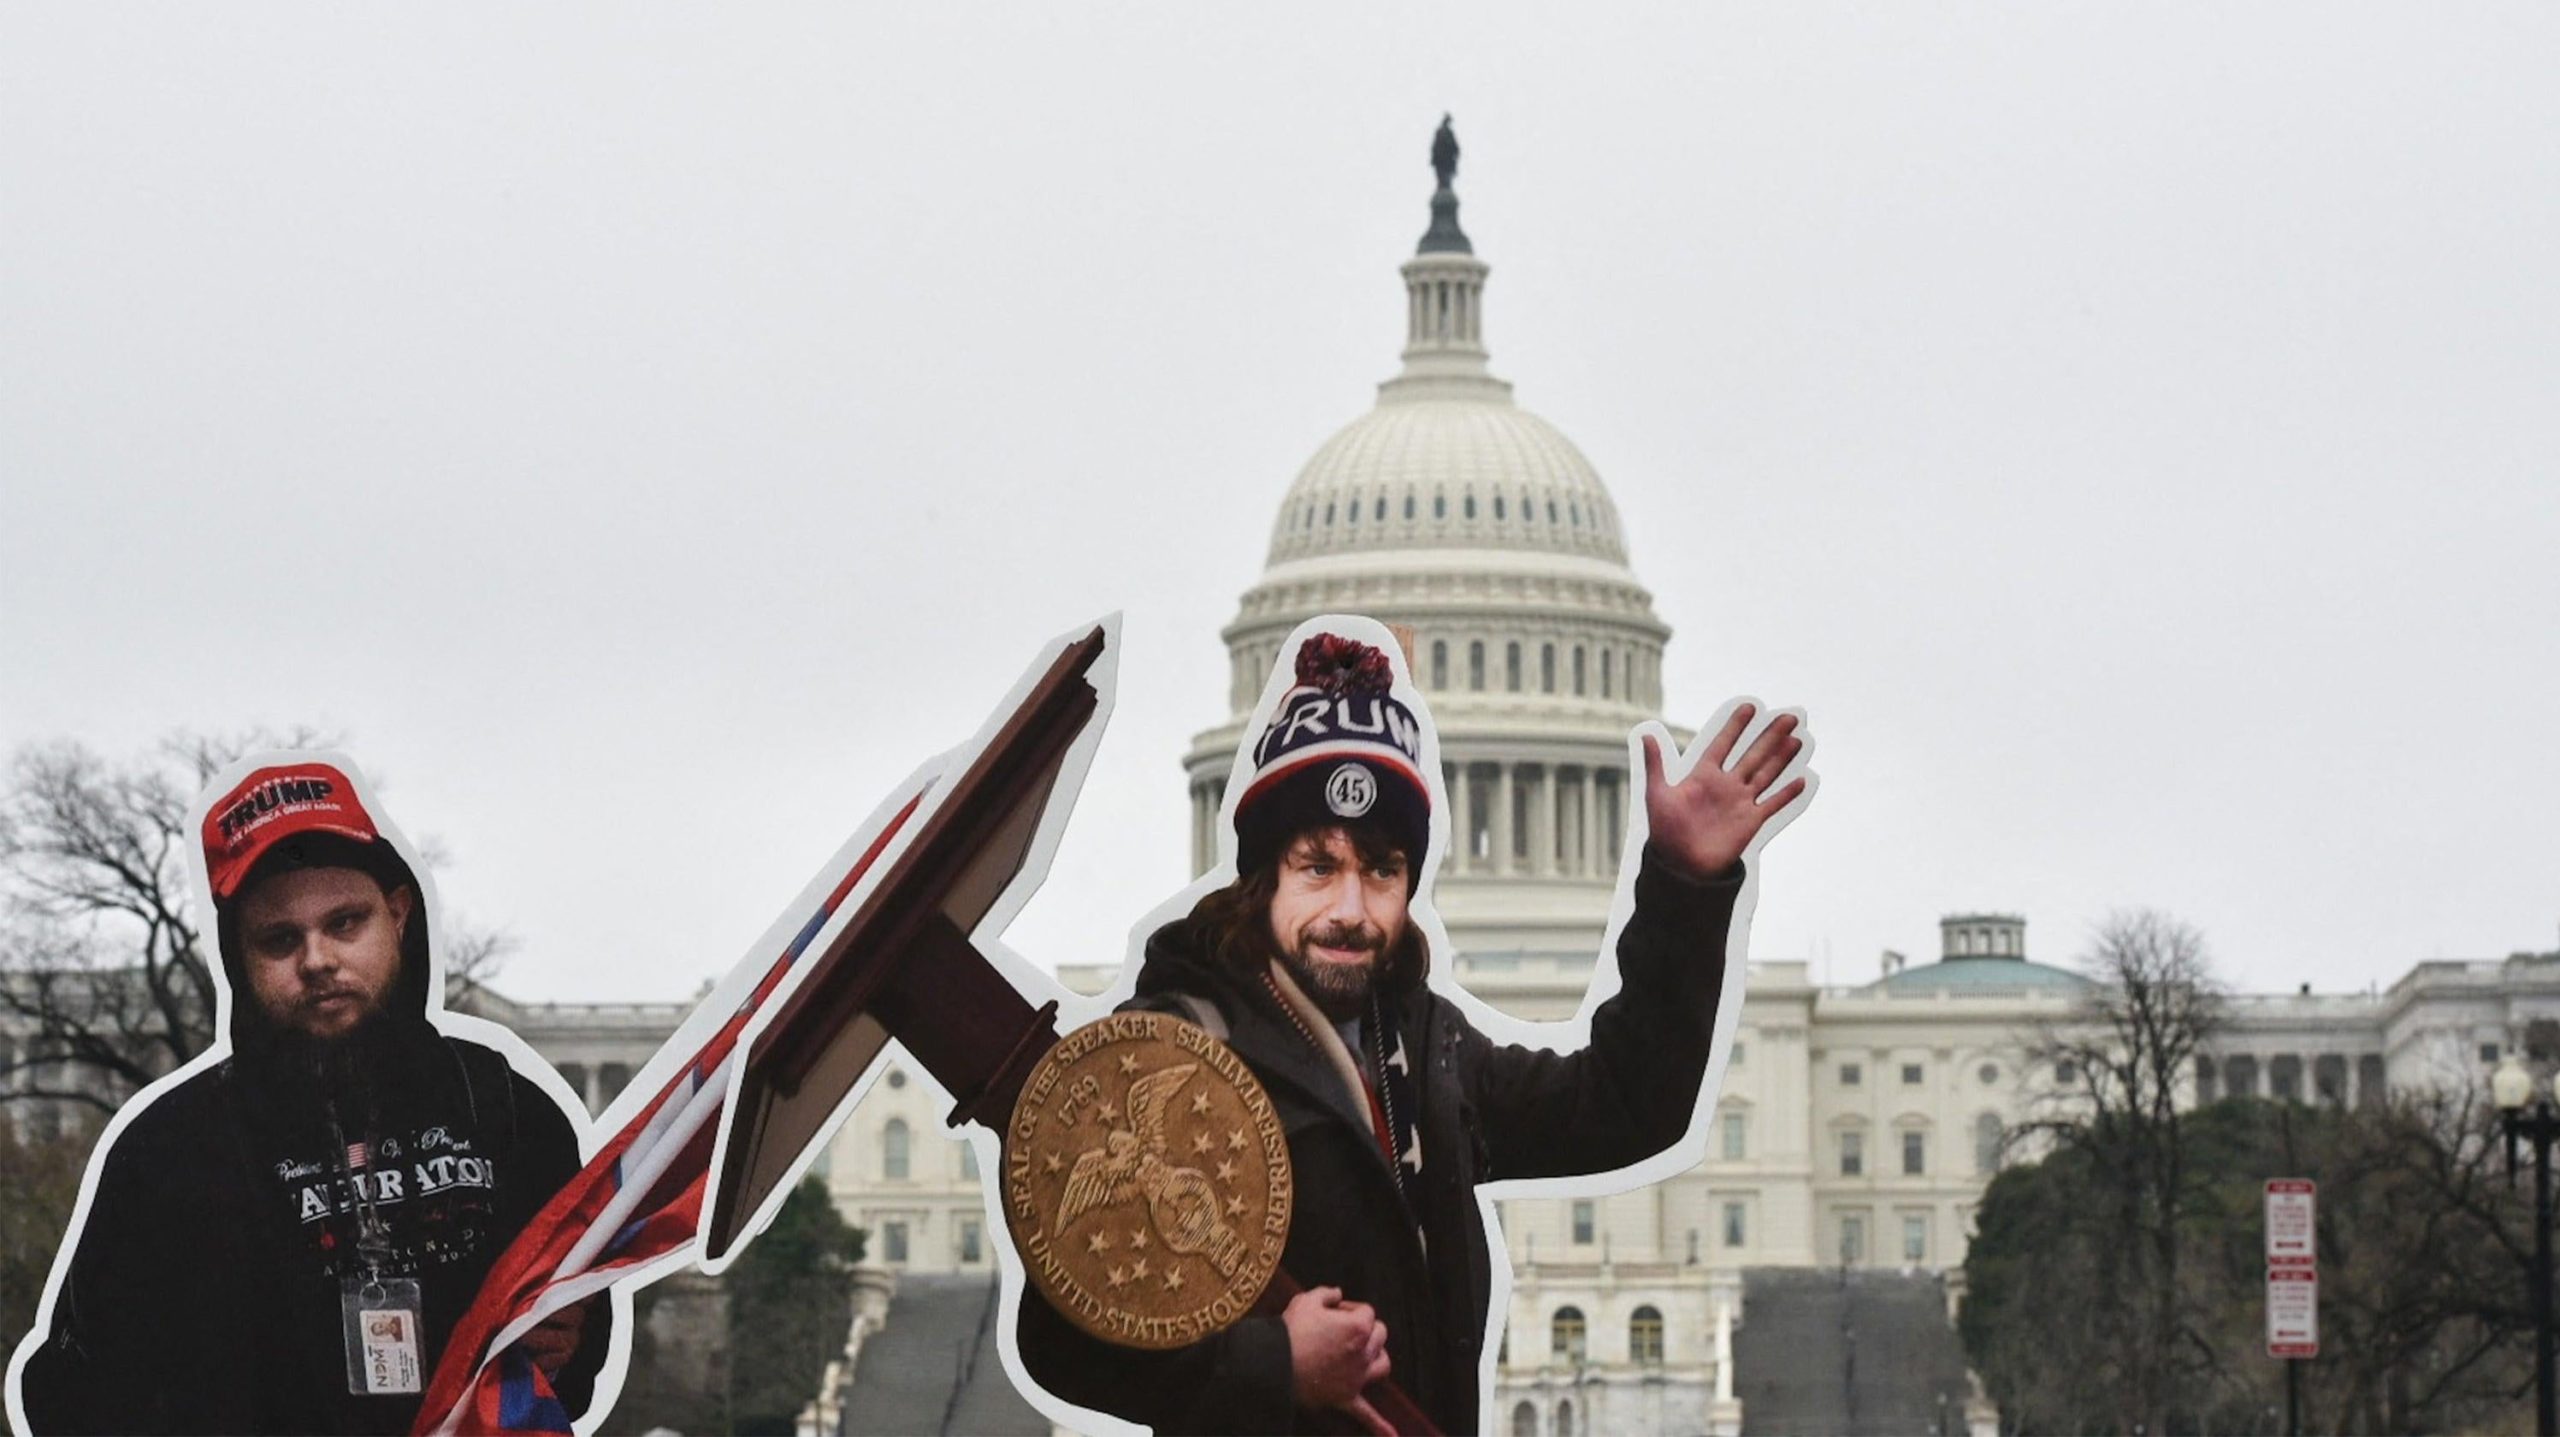 An effigy of Twitter CEO, Jack Dorsey (C), dressed as a January 6, 2021, insurrectionist is placed near the US Capitol in Washington, DC, on March 25, 2021. (Photo: Contributor, Getty Images)